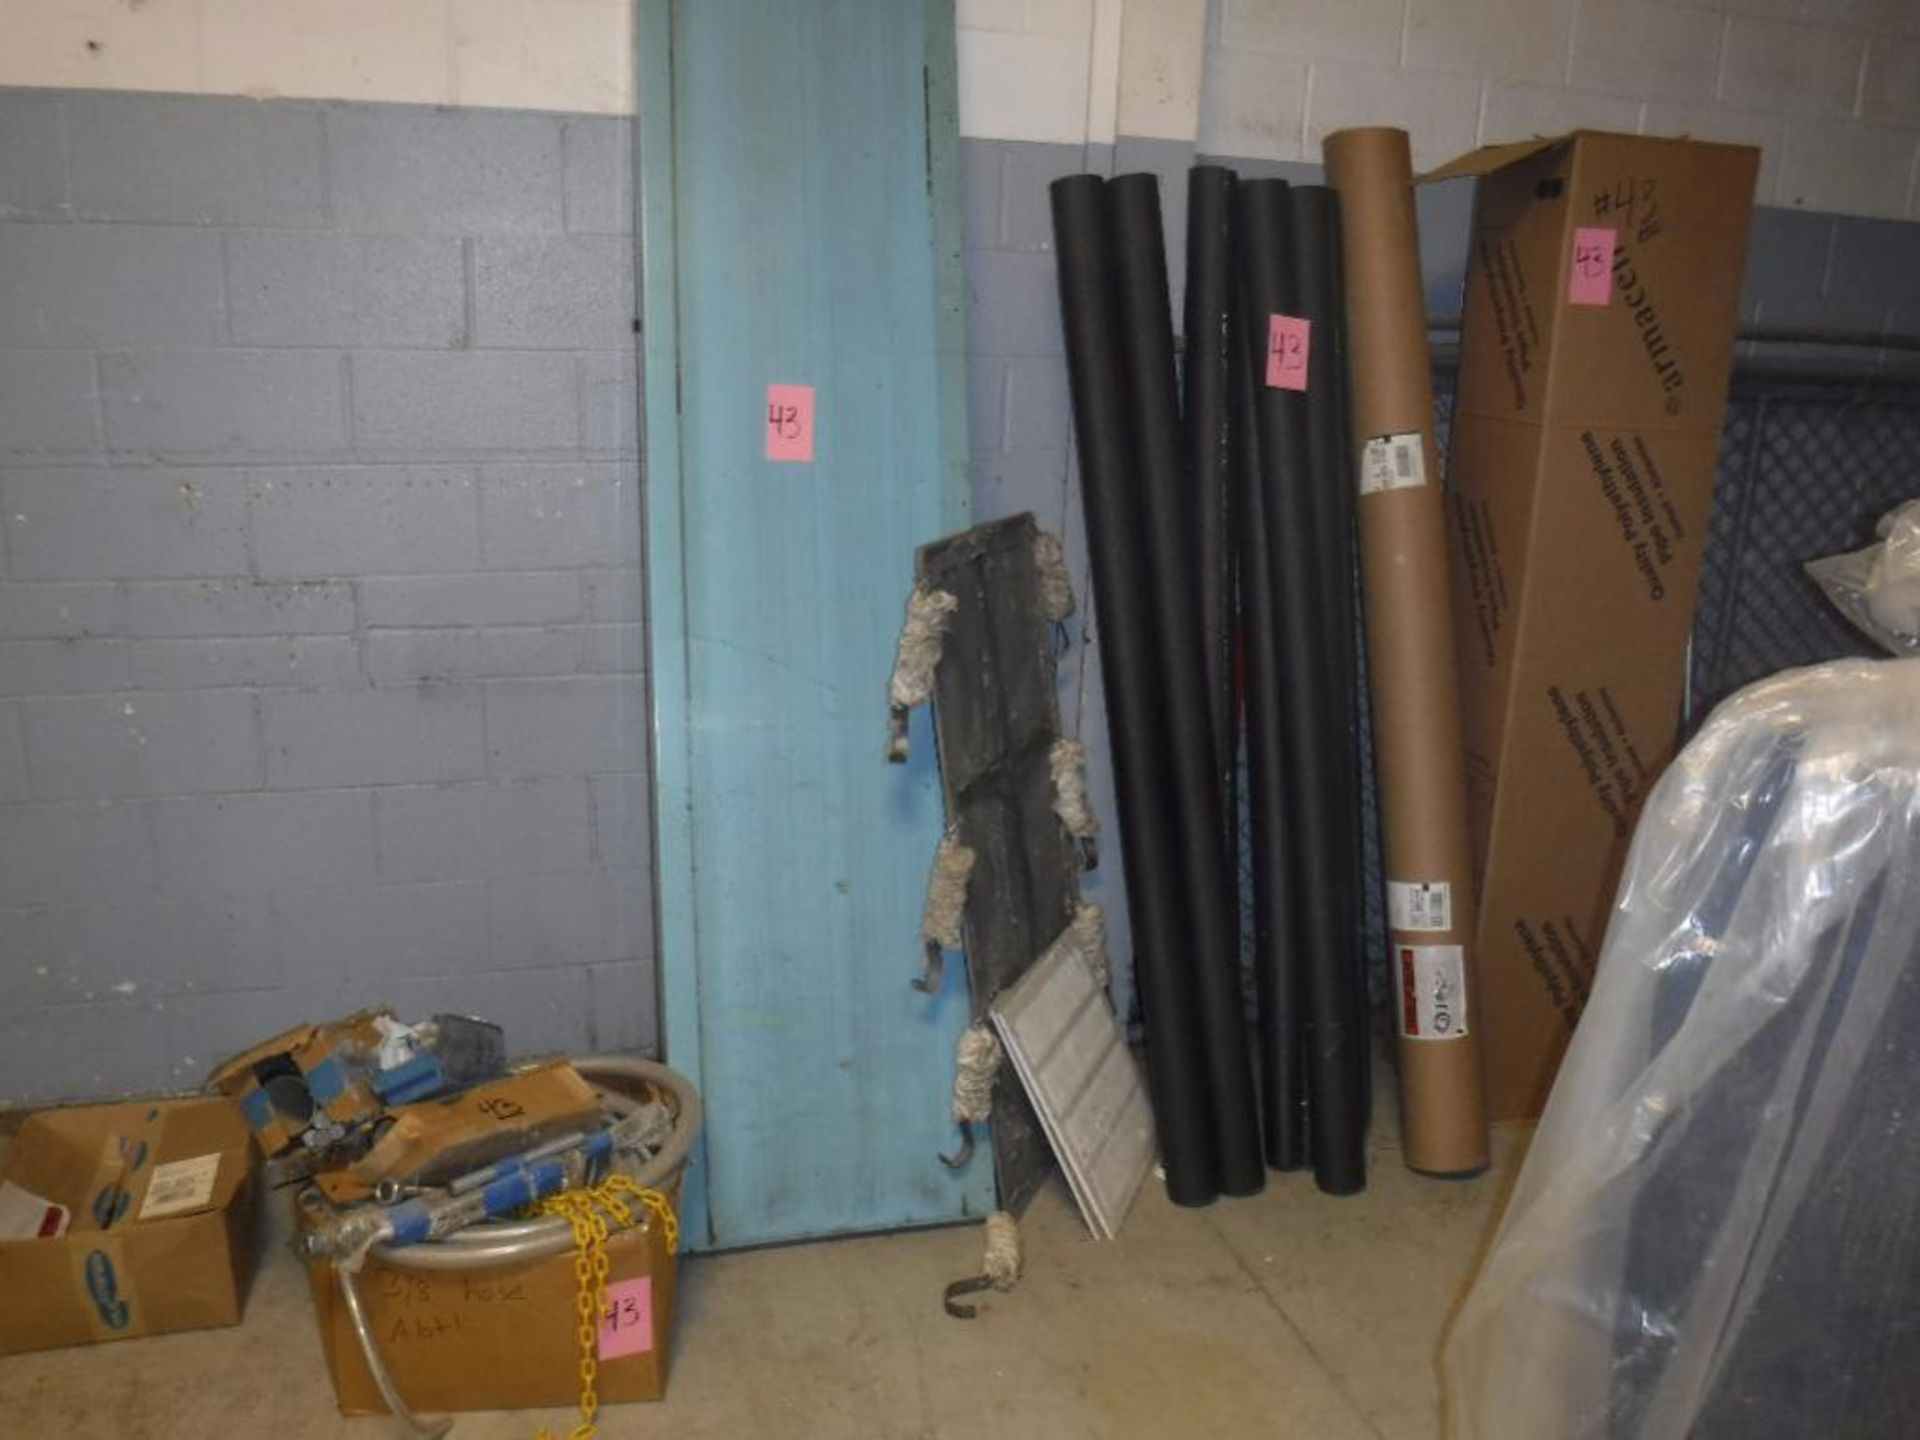 Boxes of Filters, Foam, Pipe Insulation, Hose Hangers, Hose, Blue Metal Shelf - Image 2 of 3